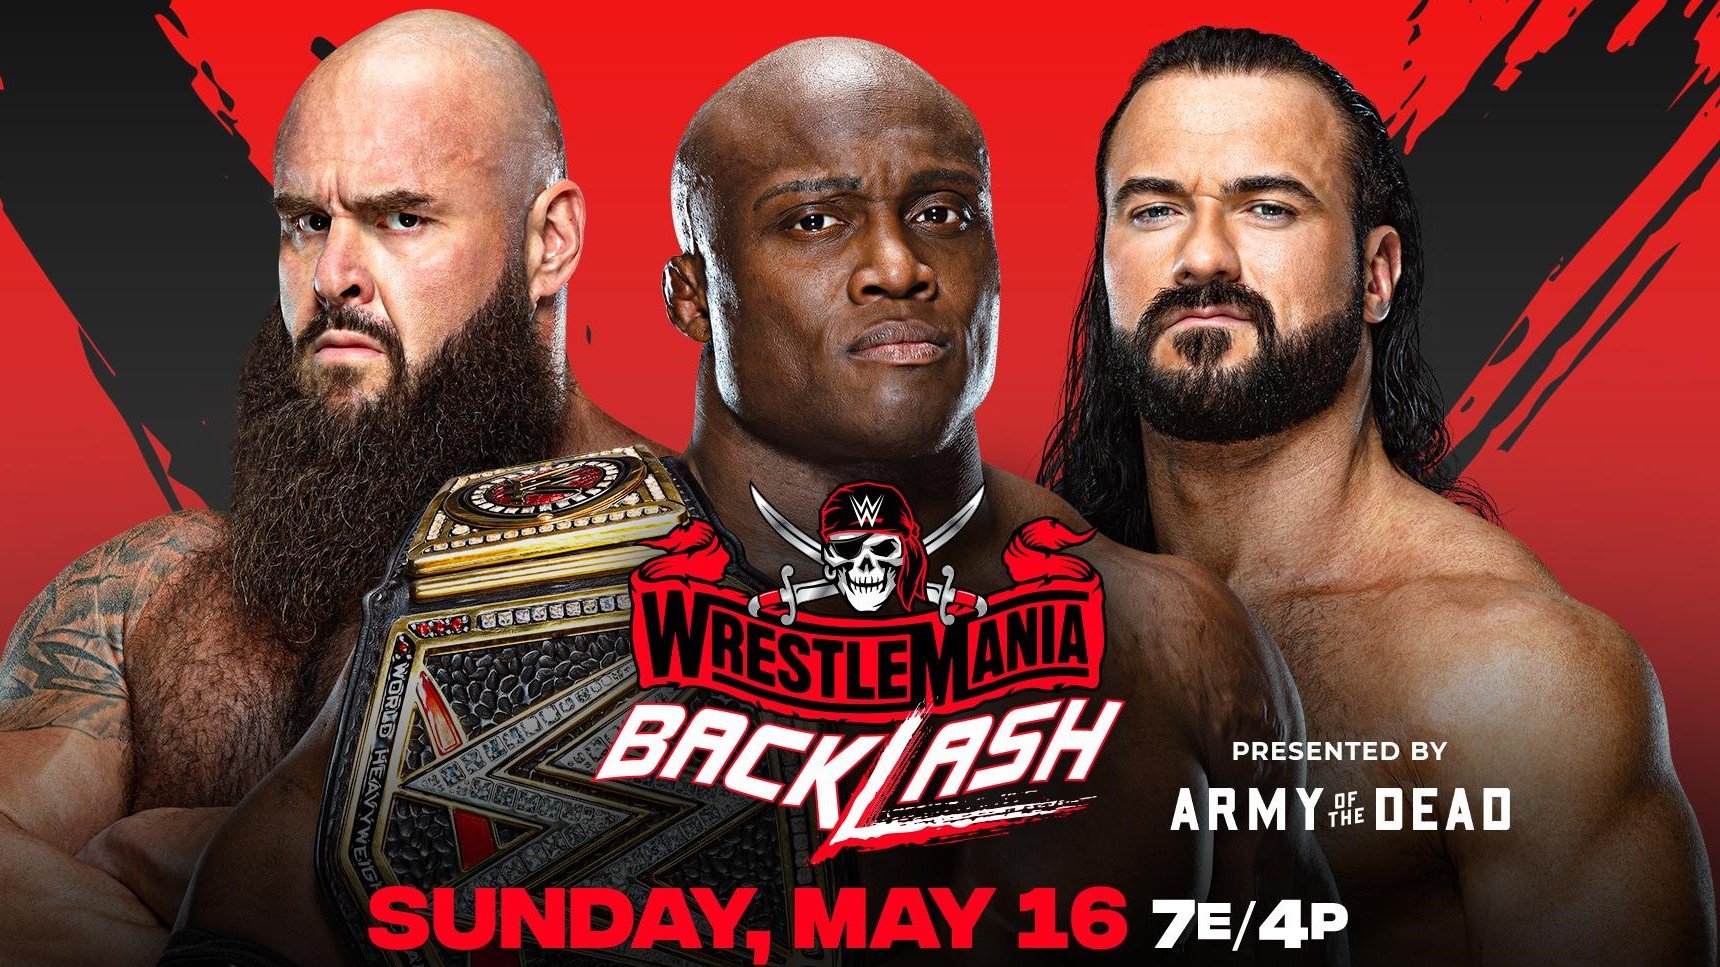 WWE WrestleMania Backlash live stream How to watch without extra PPV fees now Android Central